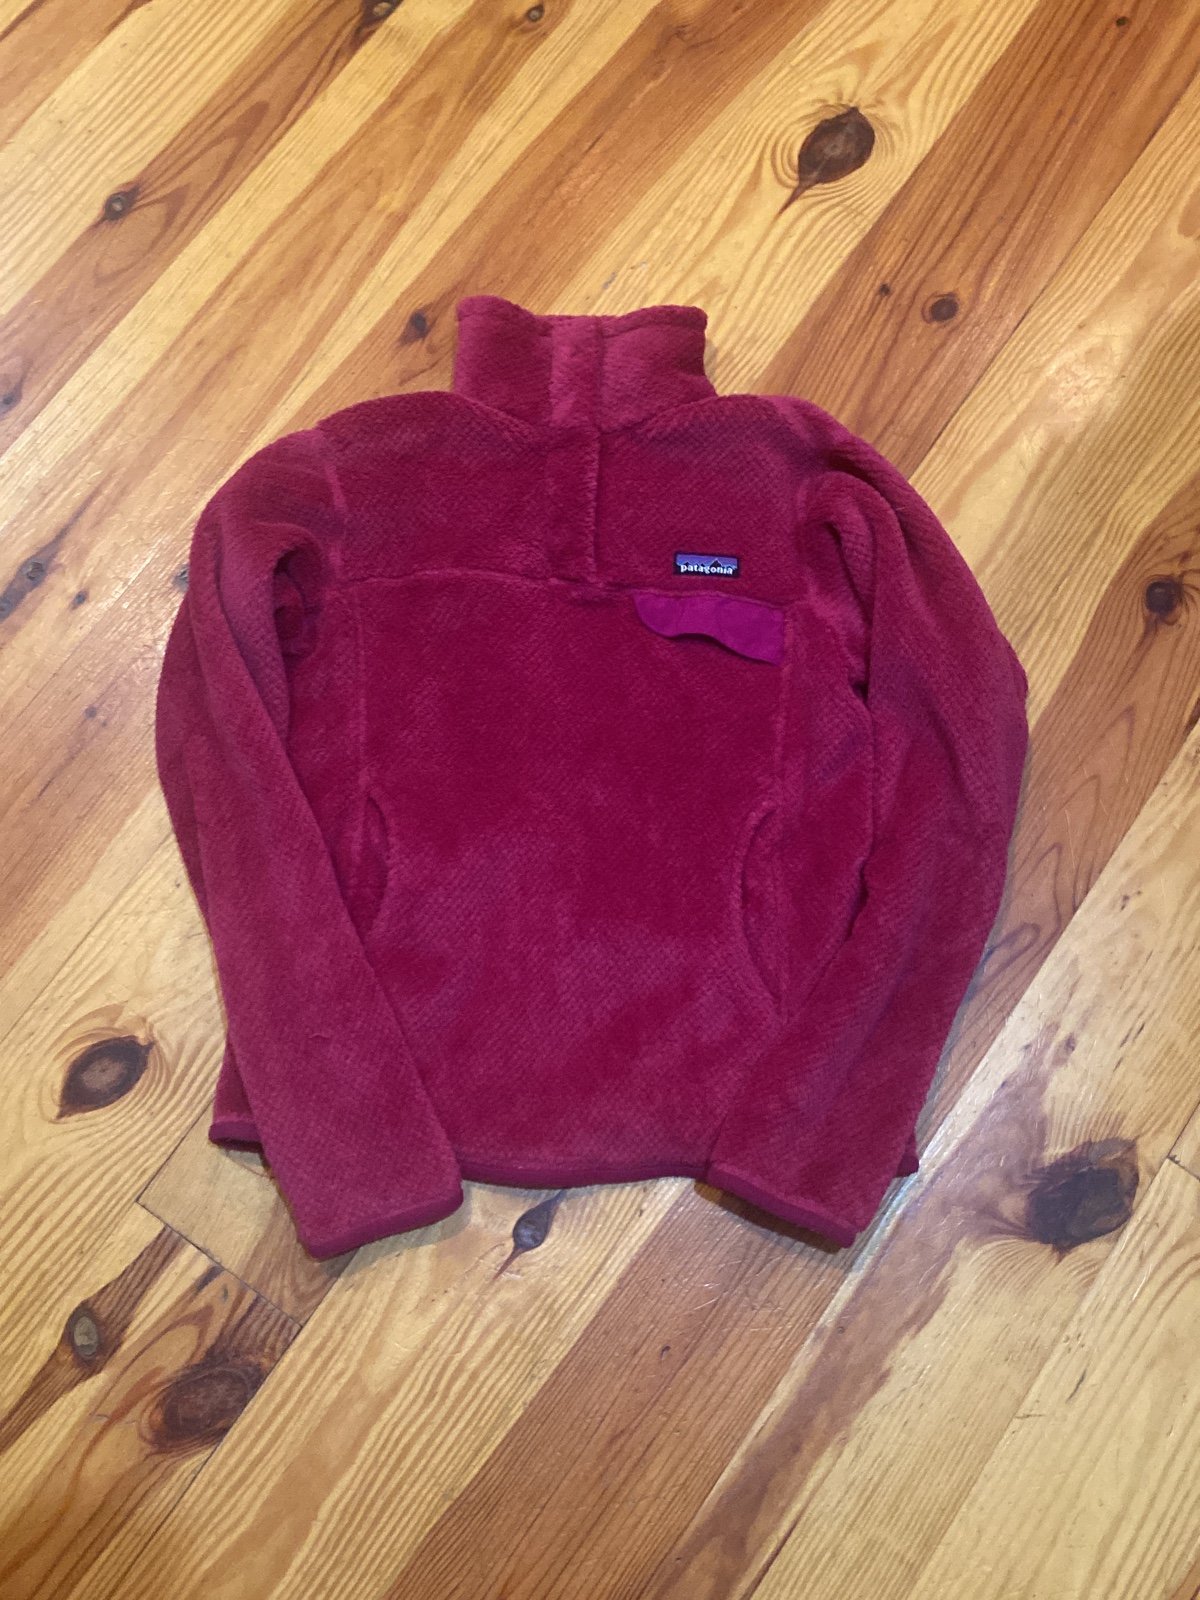 Wholesale price Patagonia fleece size small  excellent condition ghHIXiaHq on sale